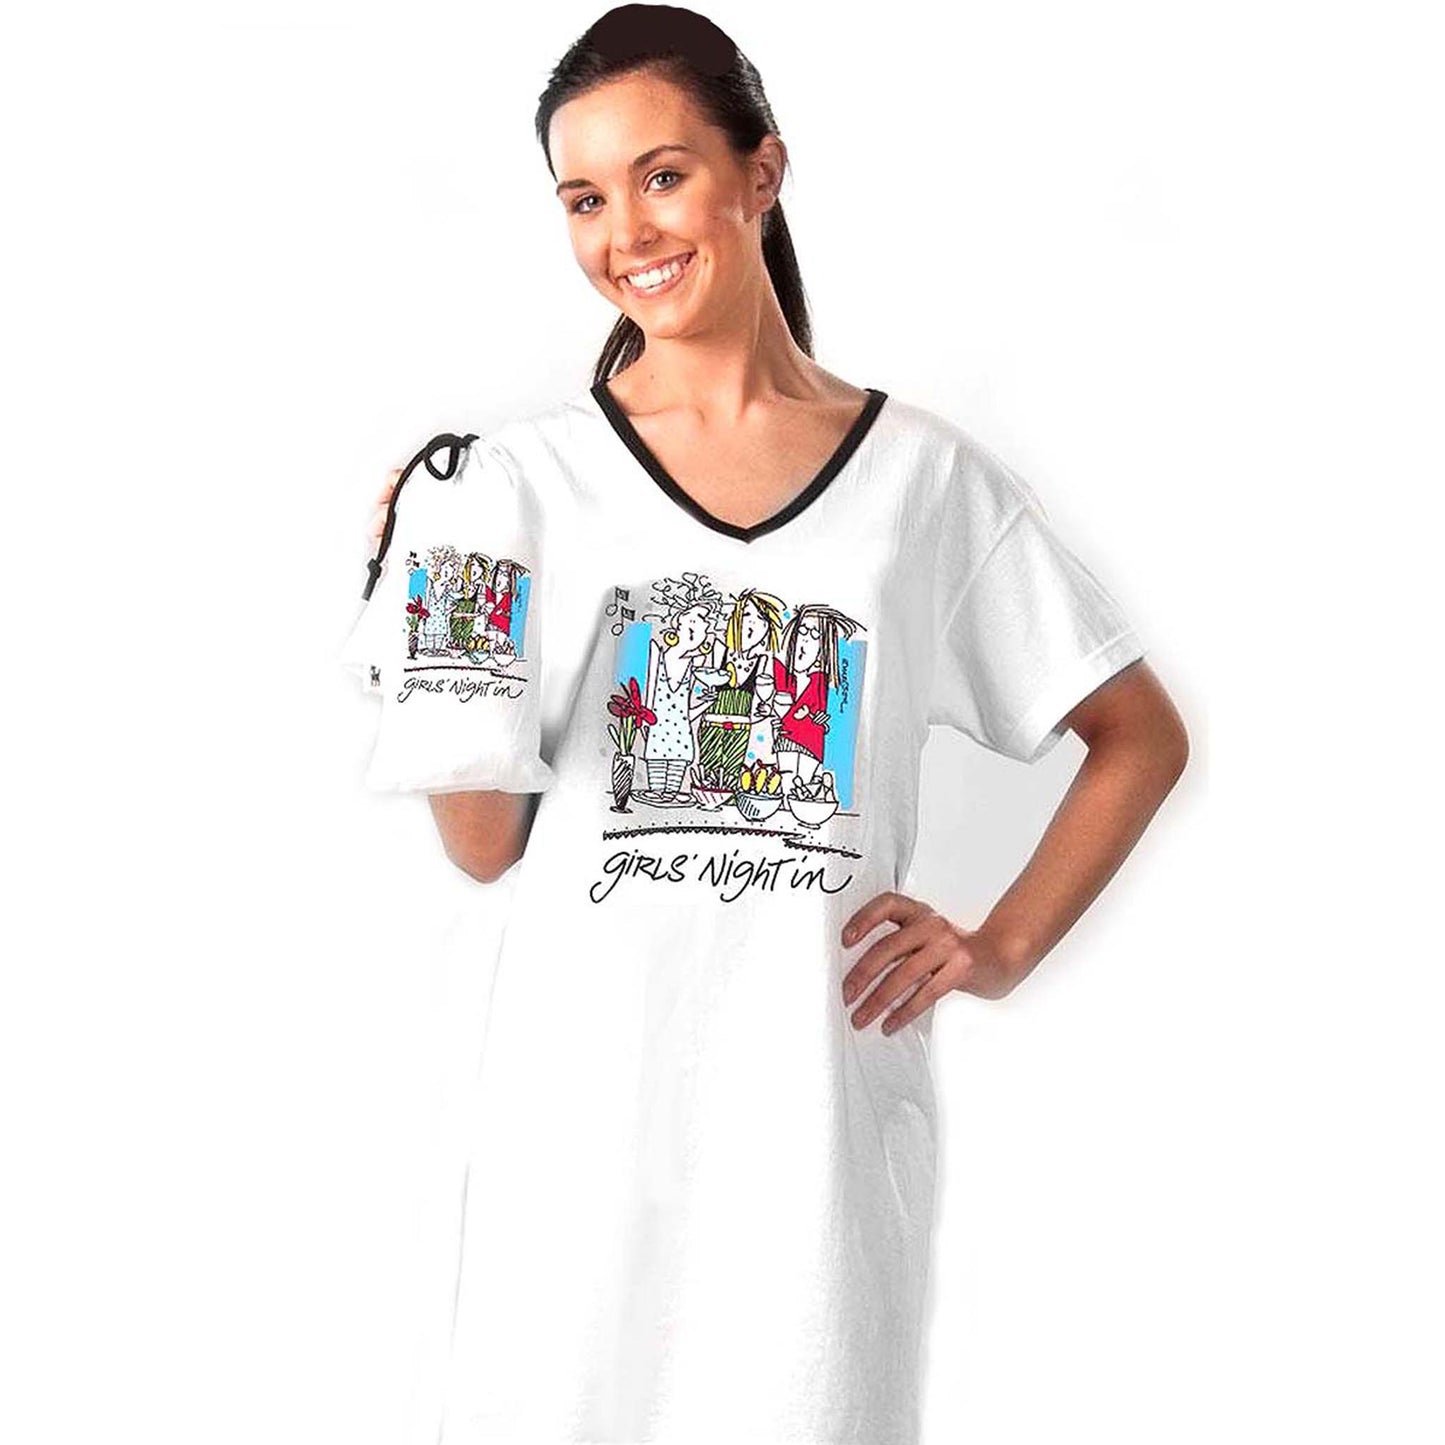 Emerson Street Clothing Co. | Girls Night In | Ladies Whimsical Nightshirt